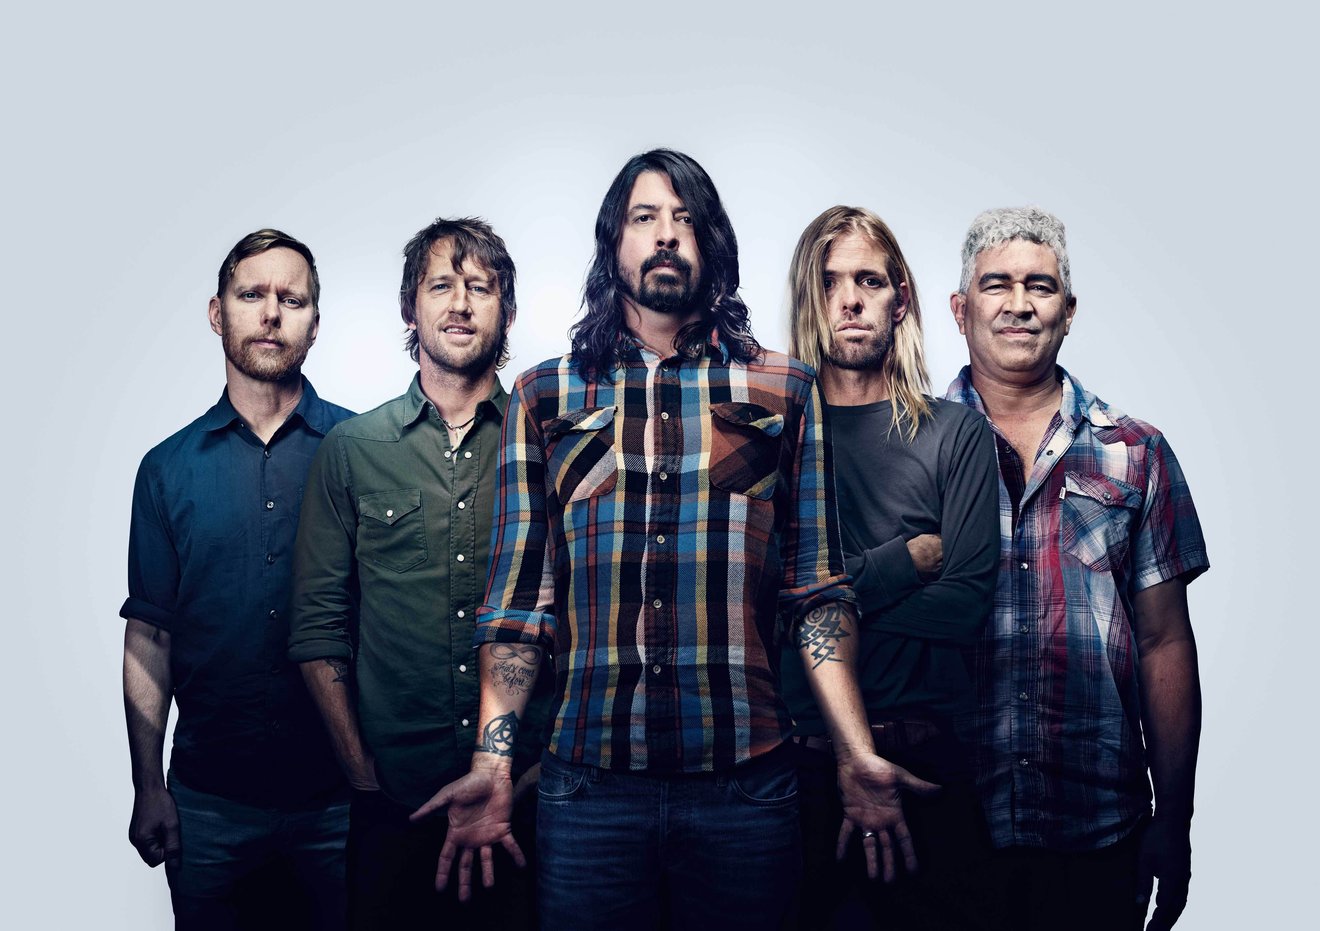 Love, Audrey  Foo fighters, There goes my hero, Foo fighters dave grohl